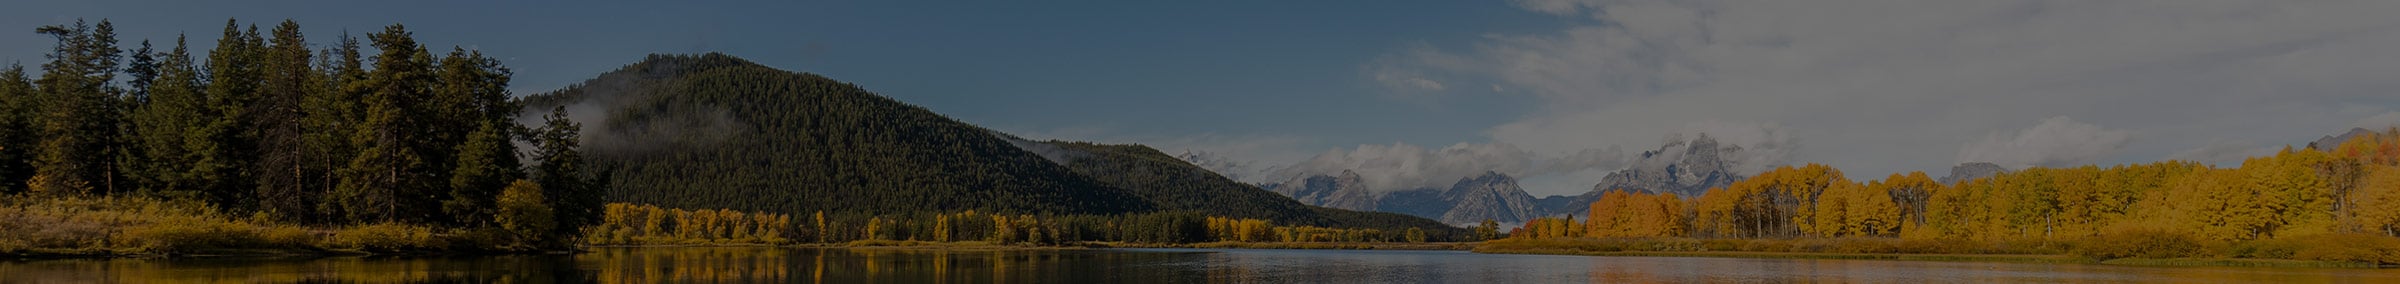 Scenic lake view of Cody/Yellowstone Country with rolling hills and mountains in the distance